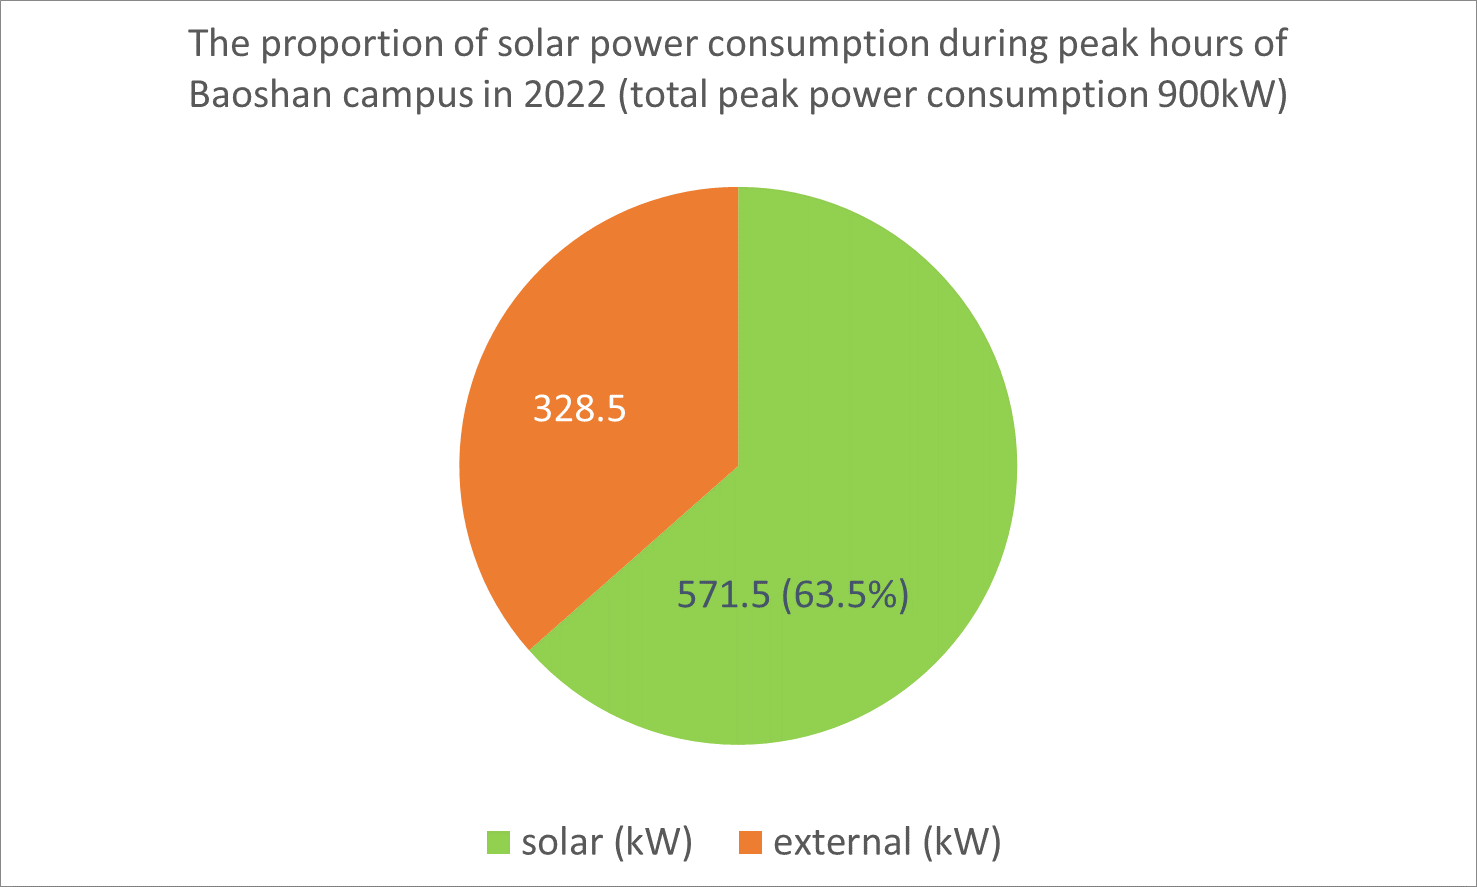 Figure 5. The proportion of solar power consumption during peak hours of the Baoshan campus in 2022